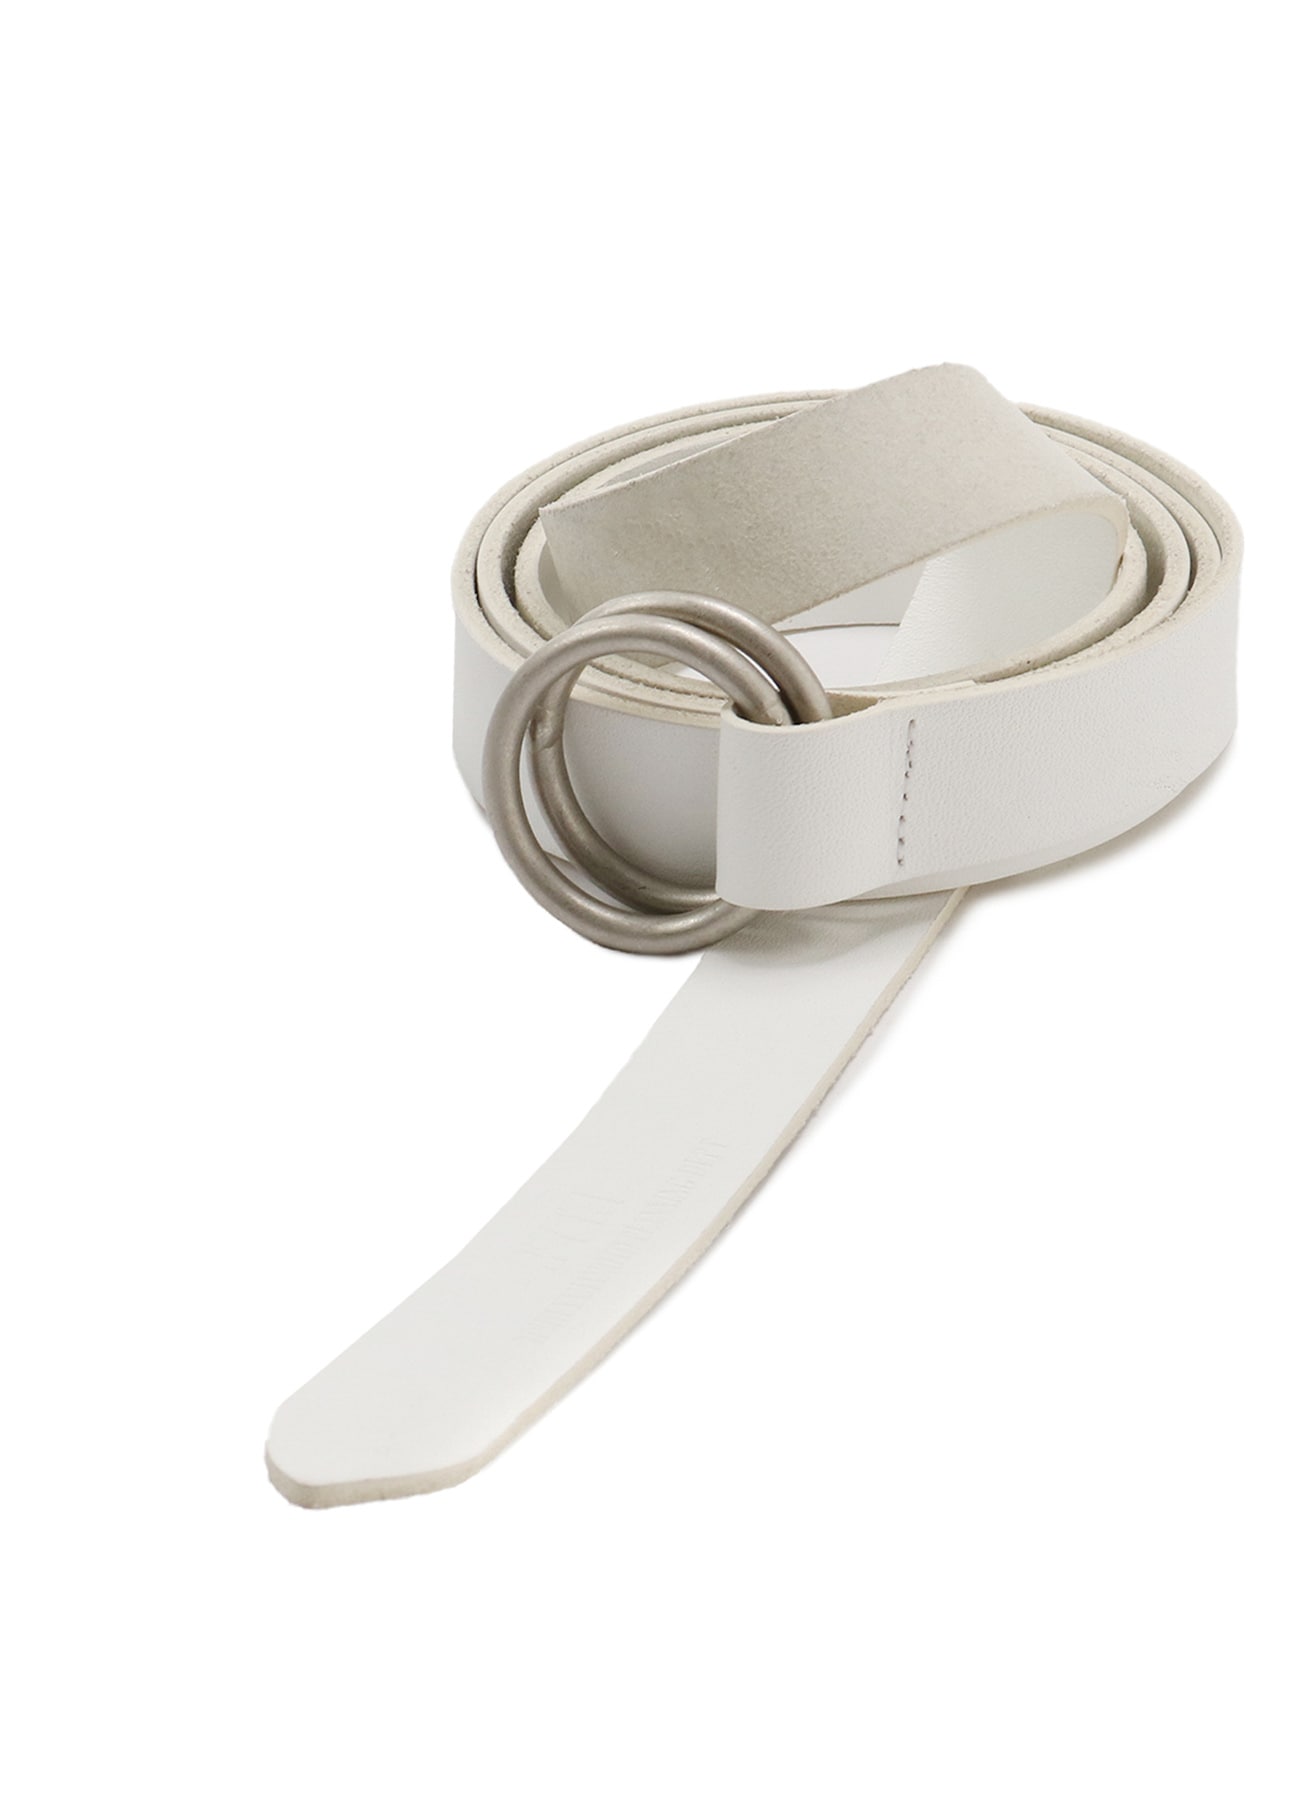 Cow Leather 25mm Long Ring Belt (FREE SIZE White): S'YTE ｜ THE